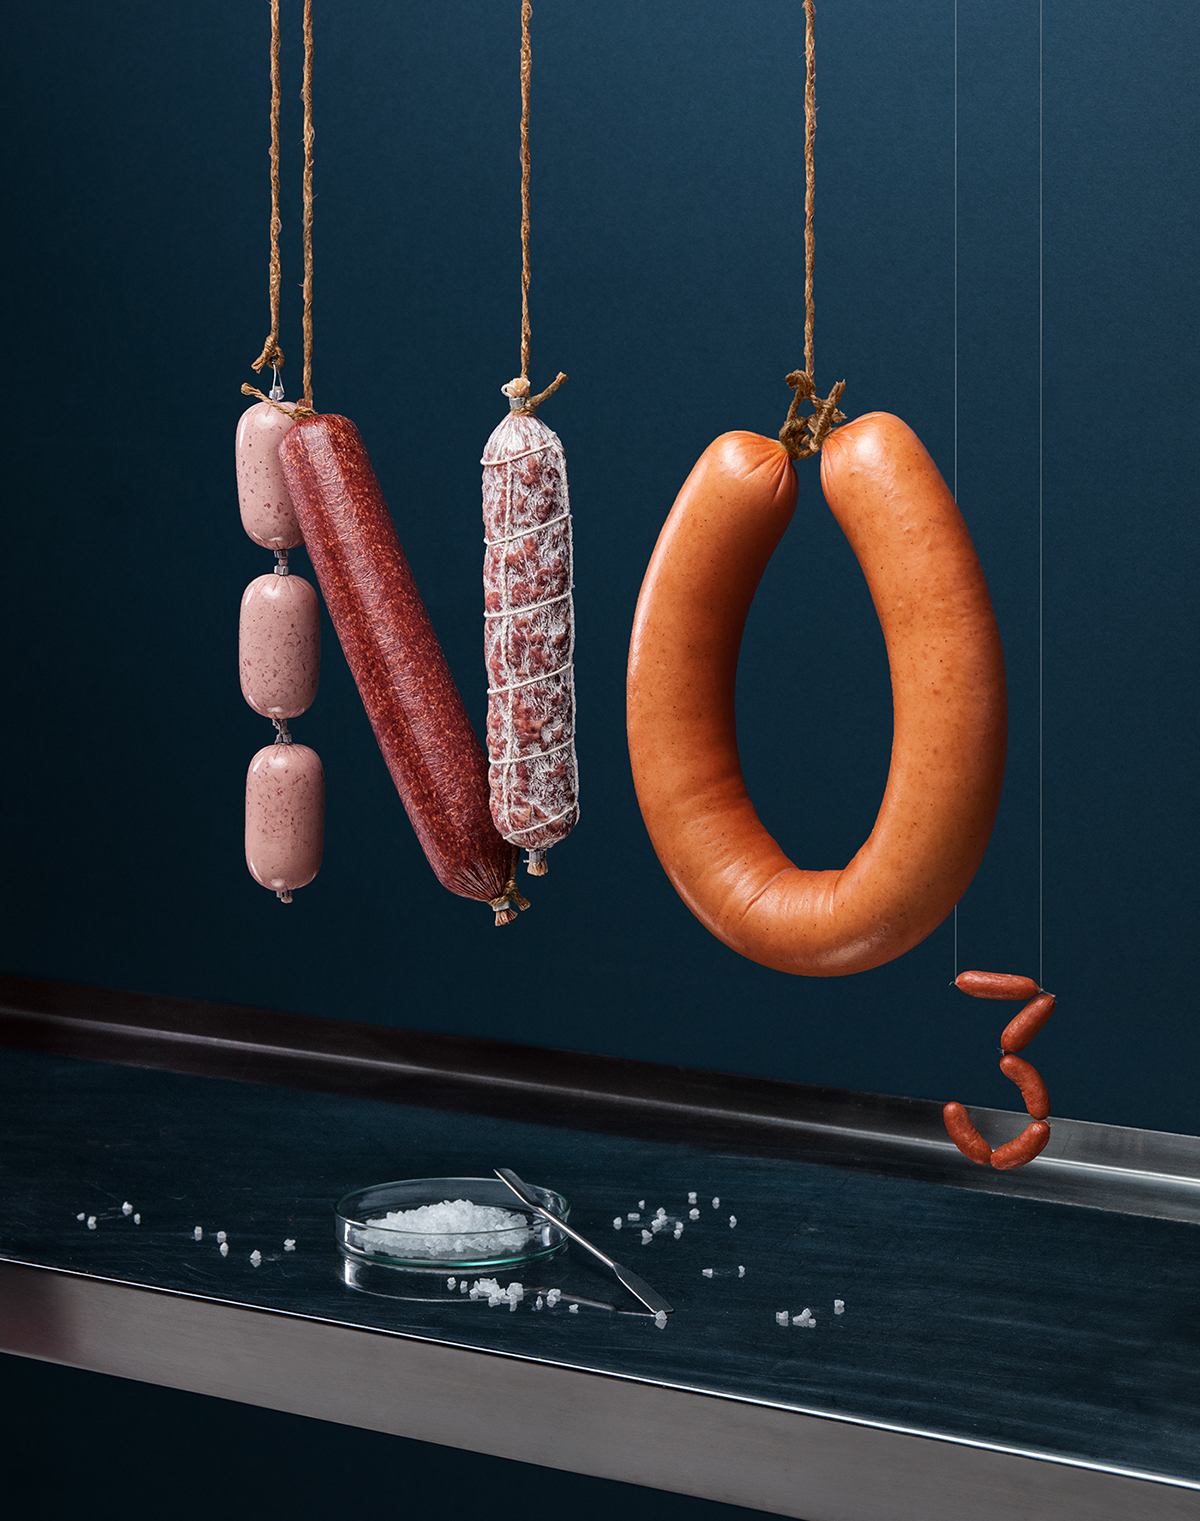 CGI 3D photo still life cover 3D Type 3d typo rocket tv magazine foreal sausage circuit boards Magazine Cover rendering